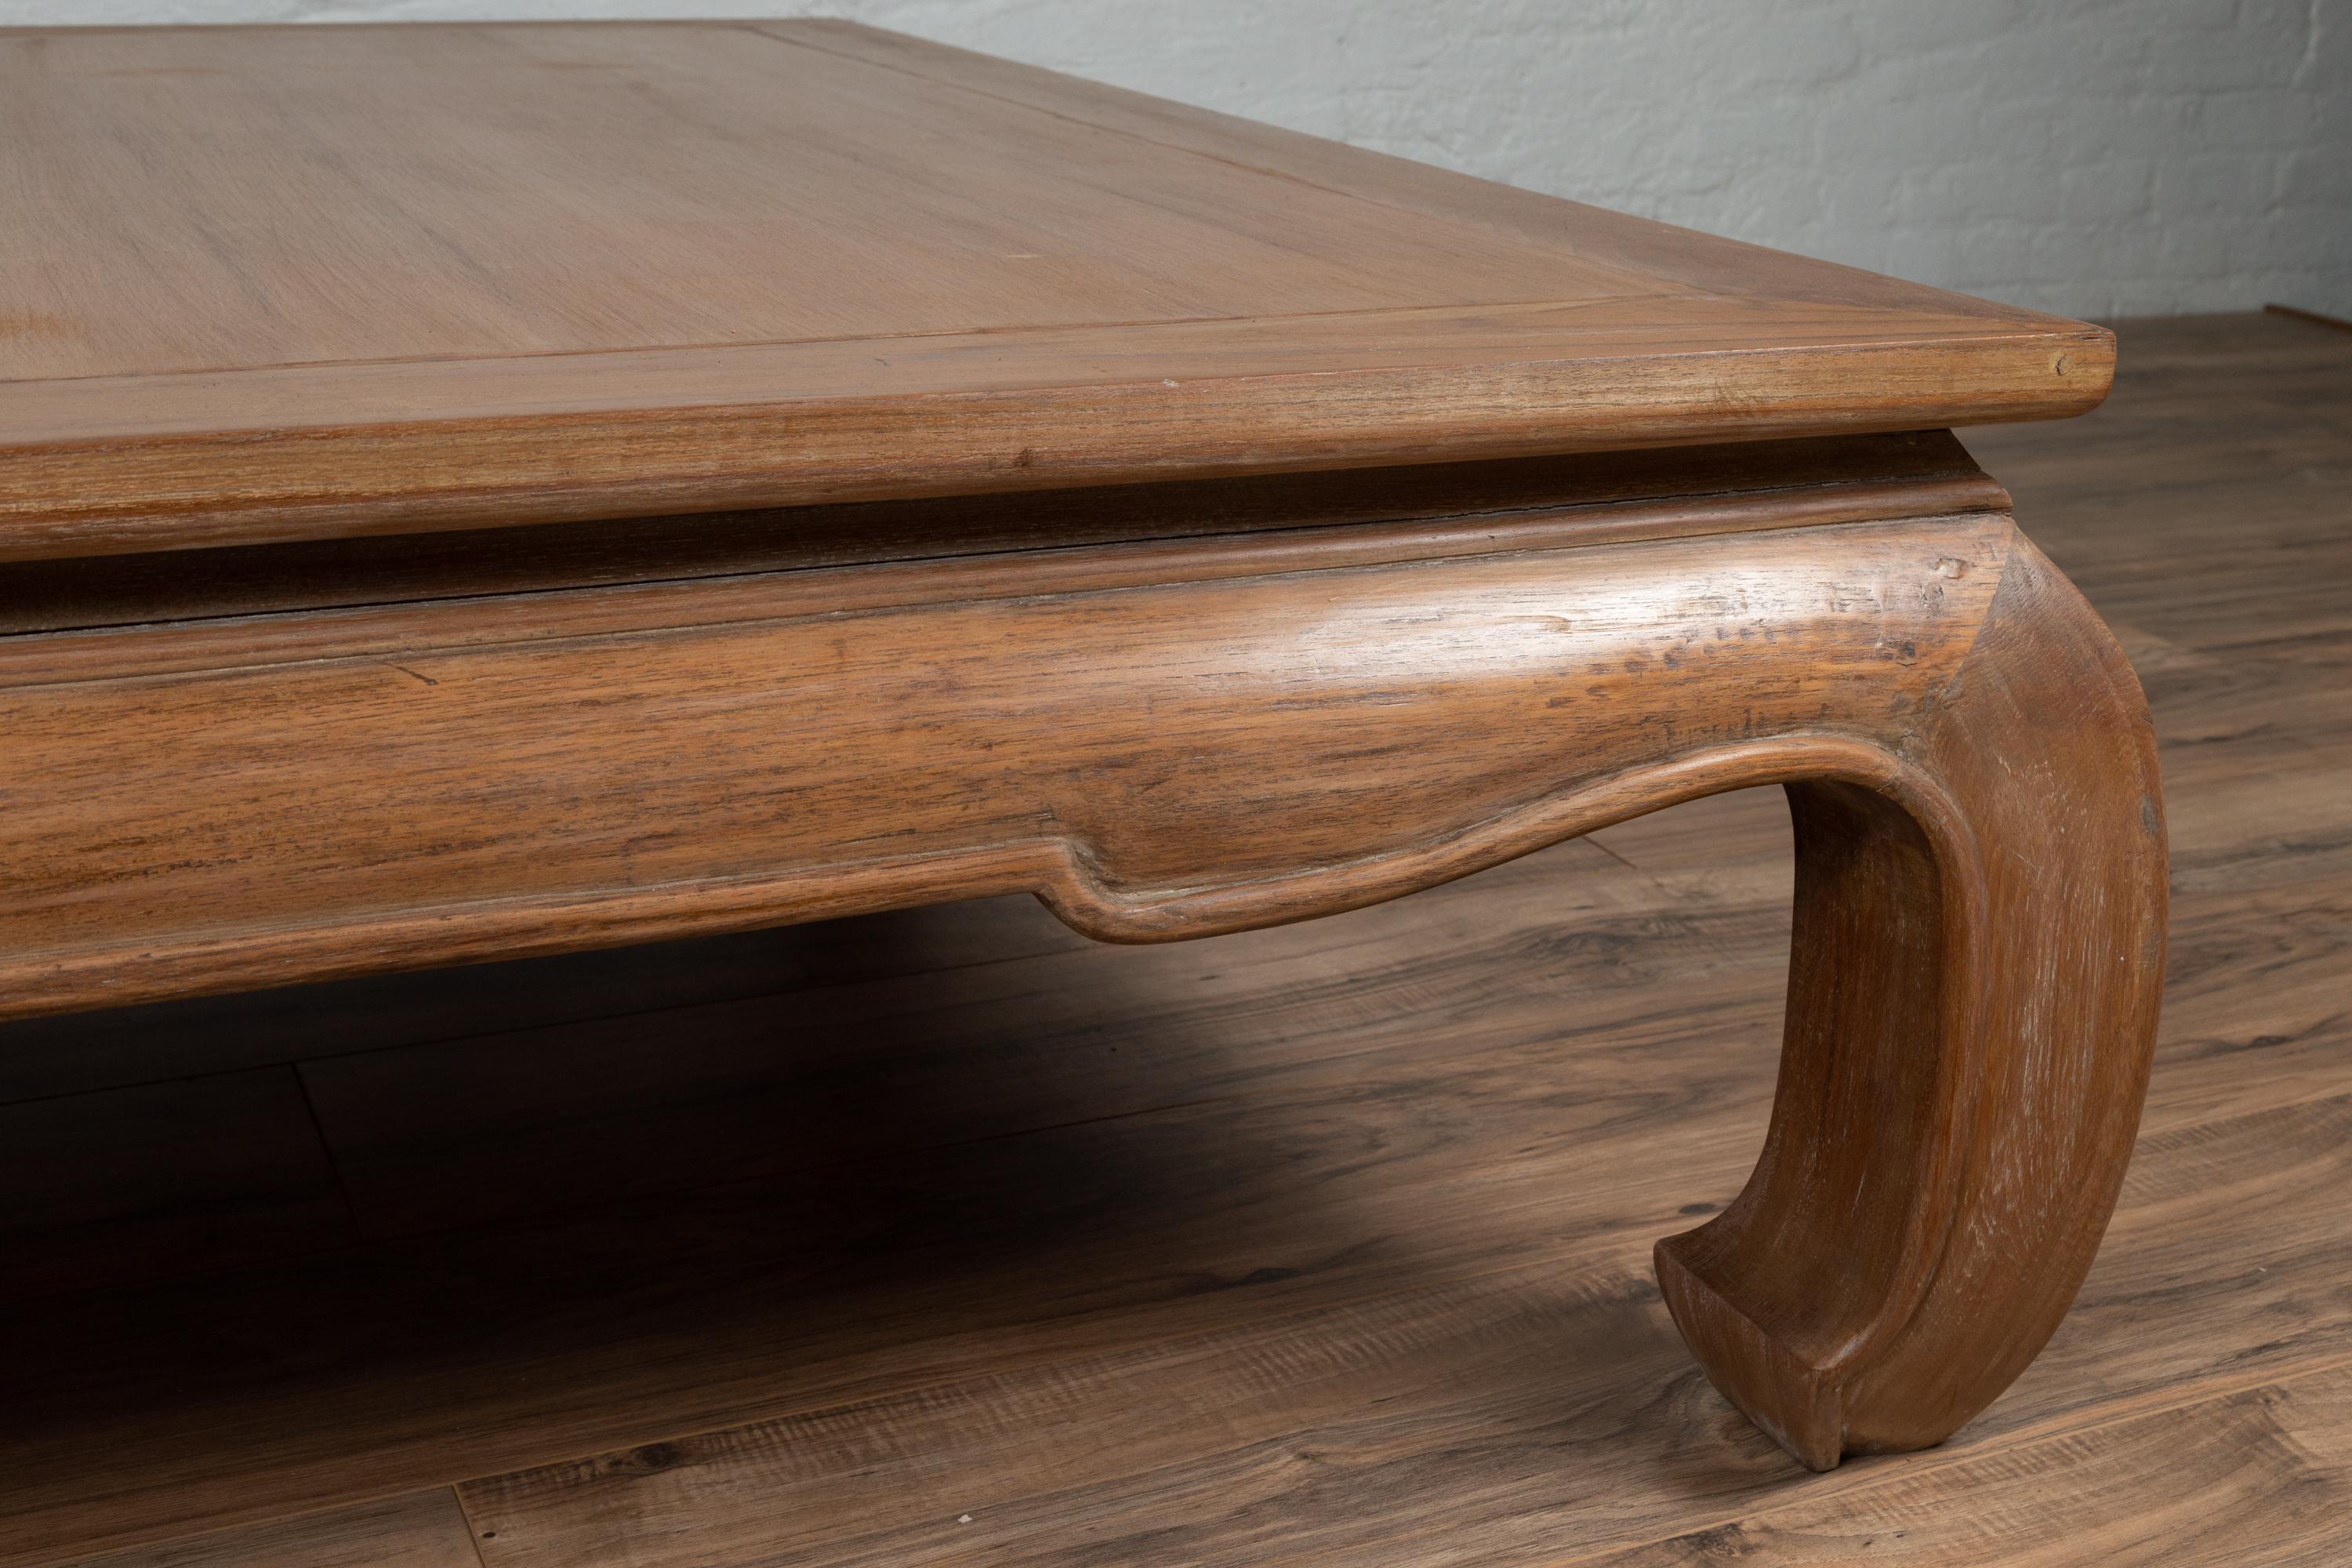 Wood Chinese Antique Coffee Table with Natural Patina, Bulging Legs and Waisted Apron